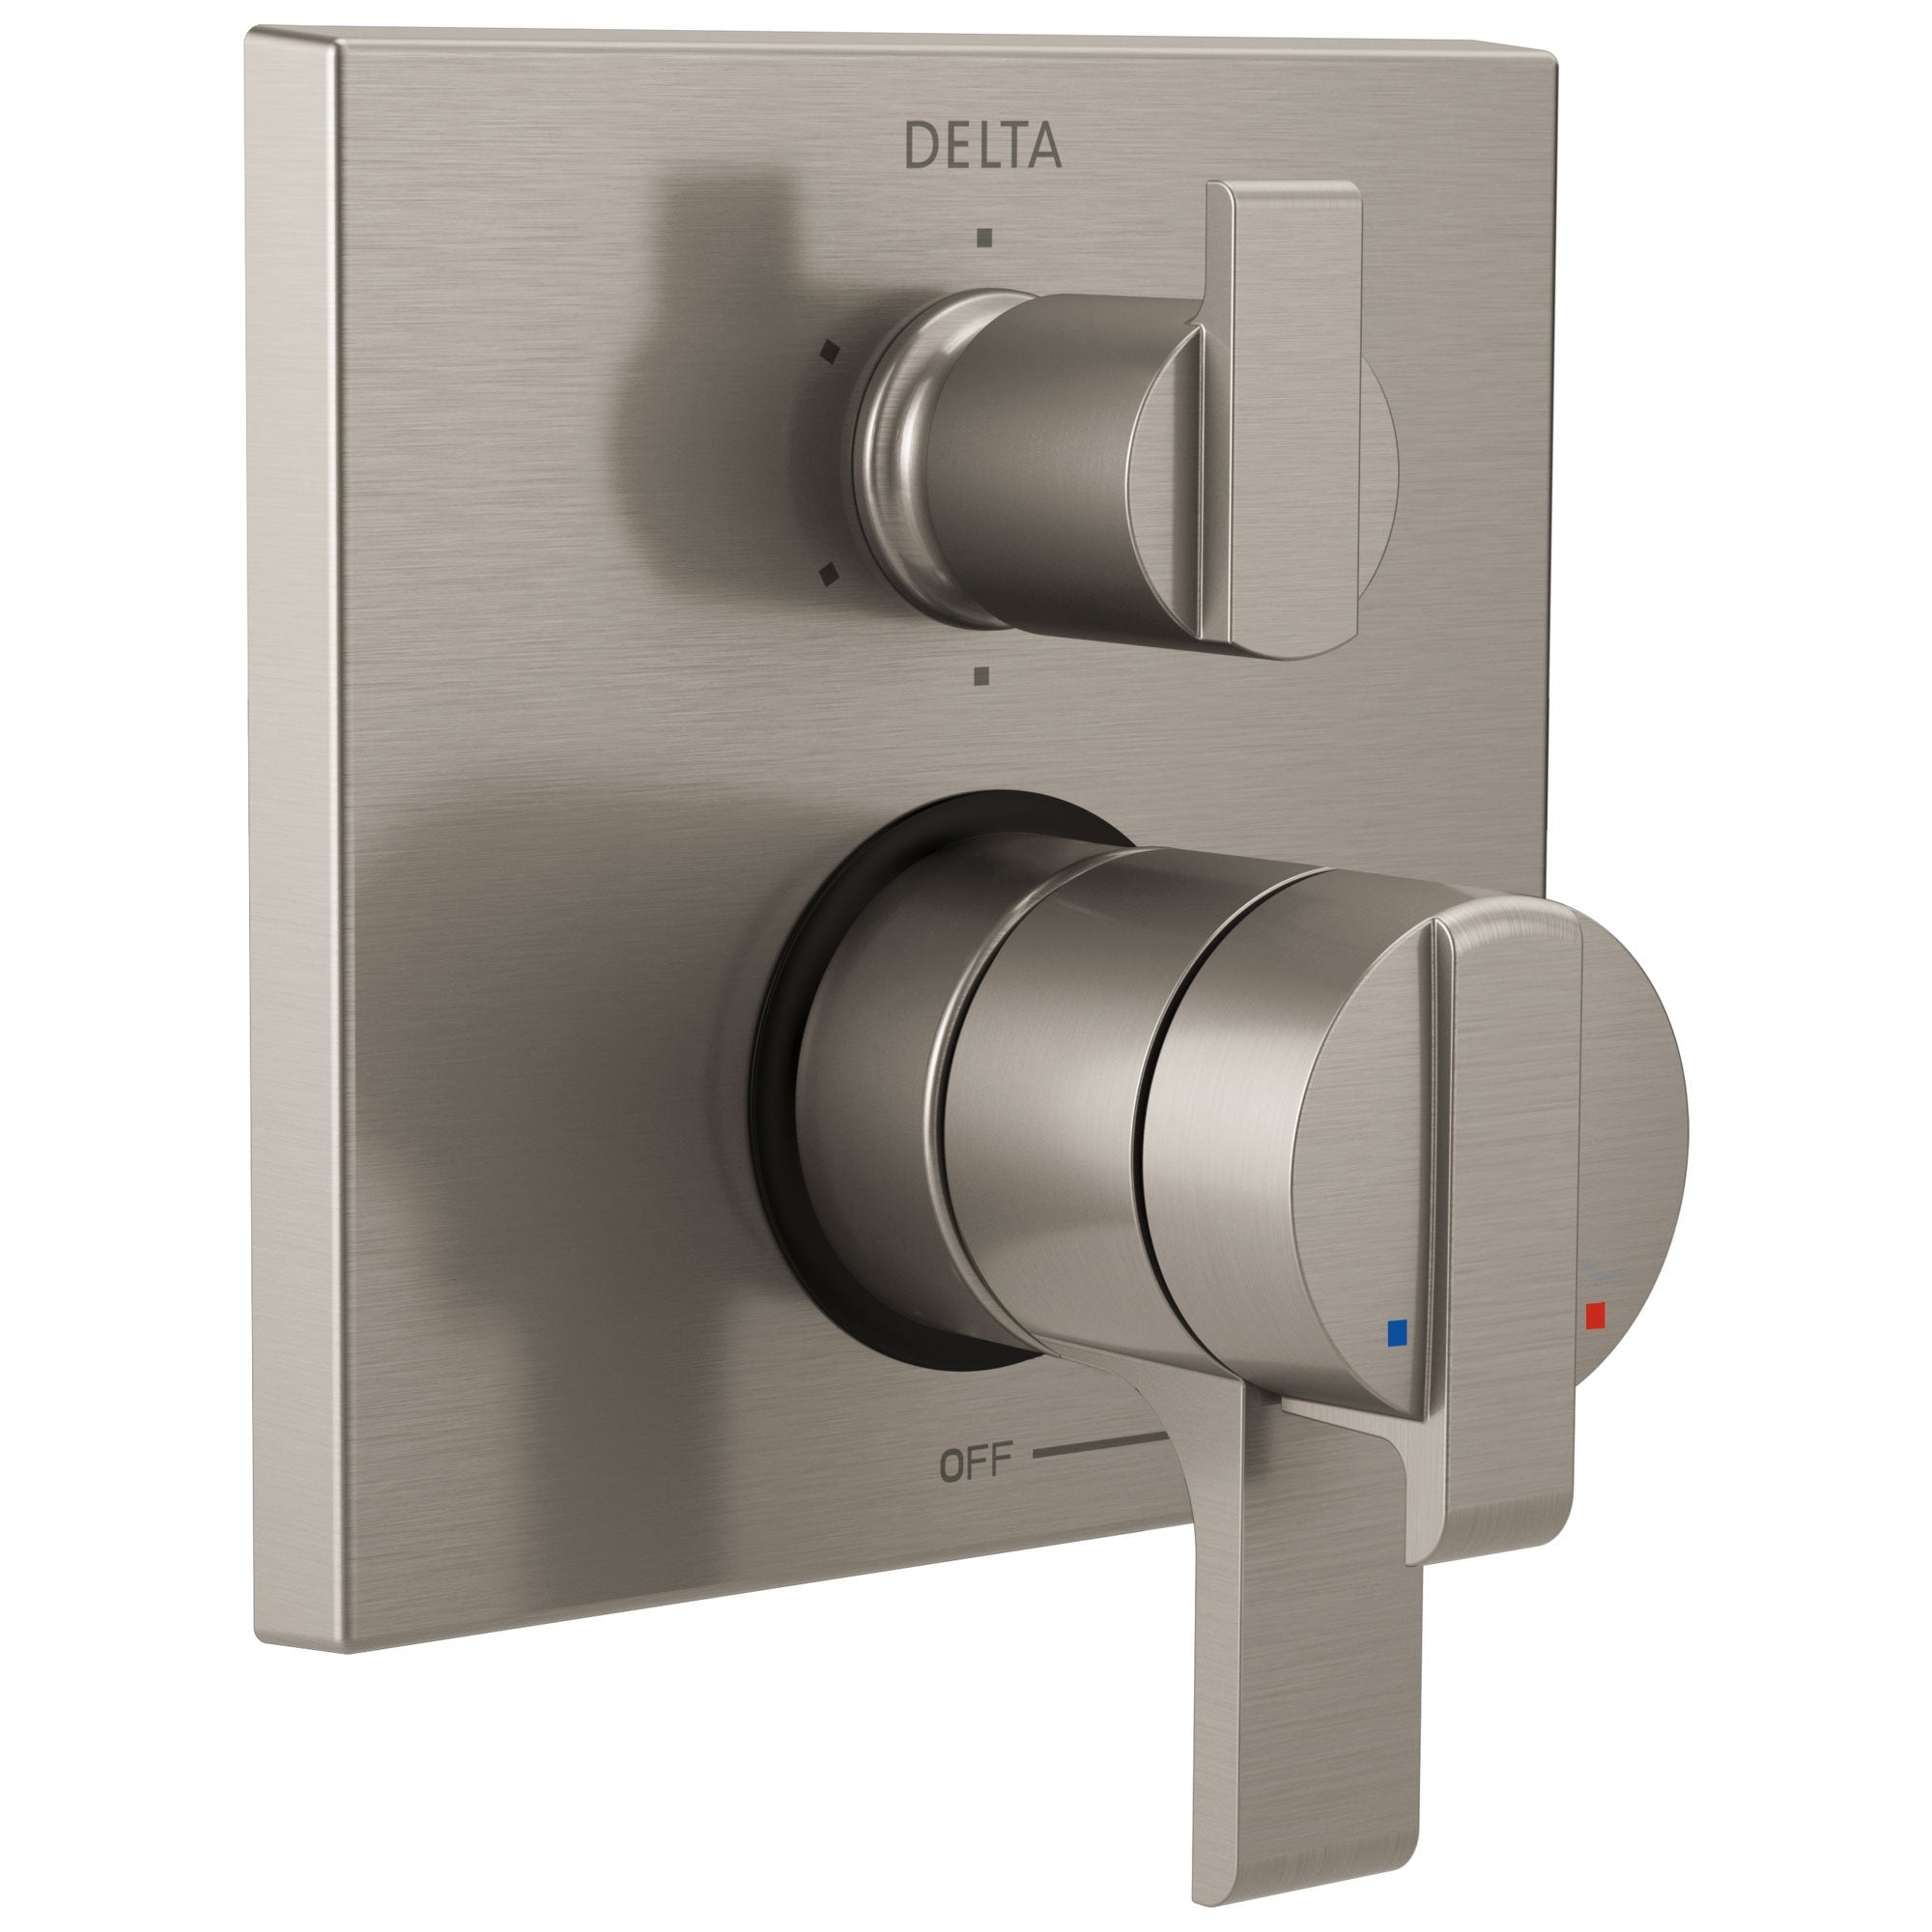 Delta Ara Stainless Steel Finish Modern Shower Faucet Control Handle with 6-Setting Integrated Diverter Includes Trim Kit and Rough-in Valve with Stops D2149V